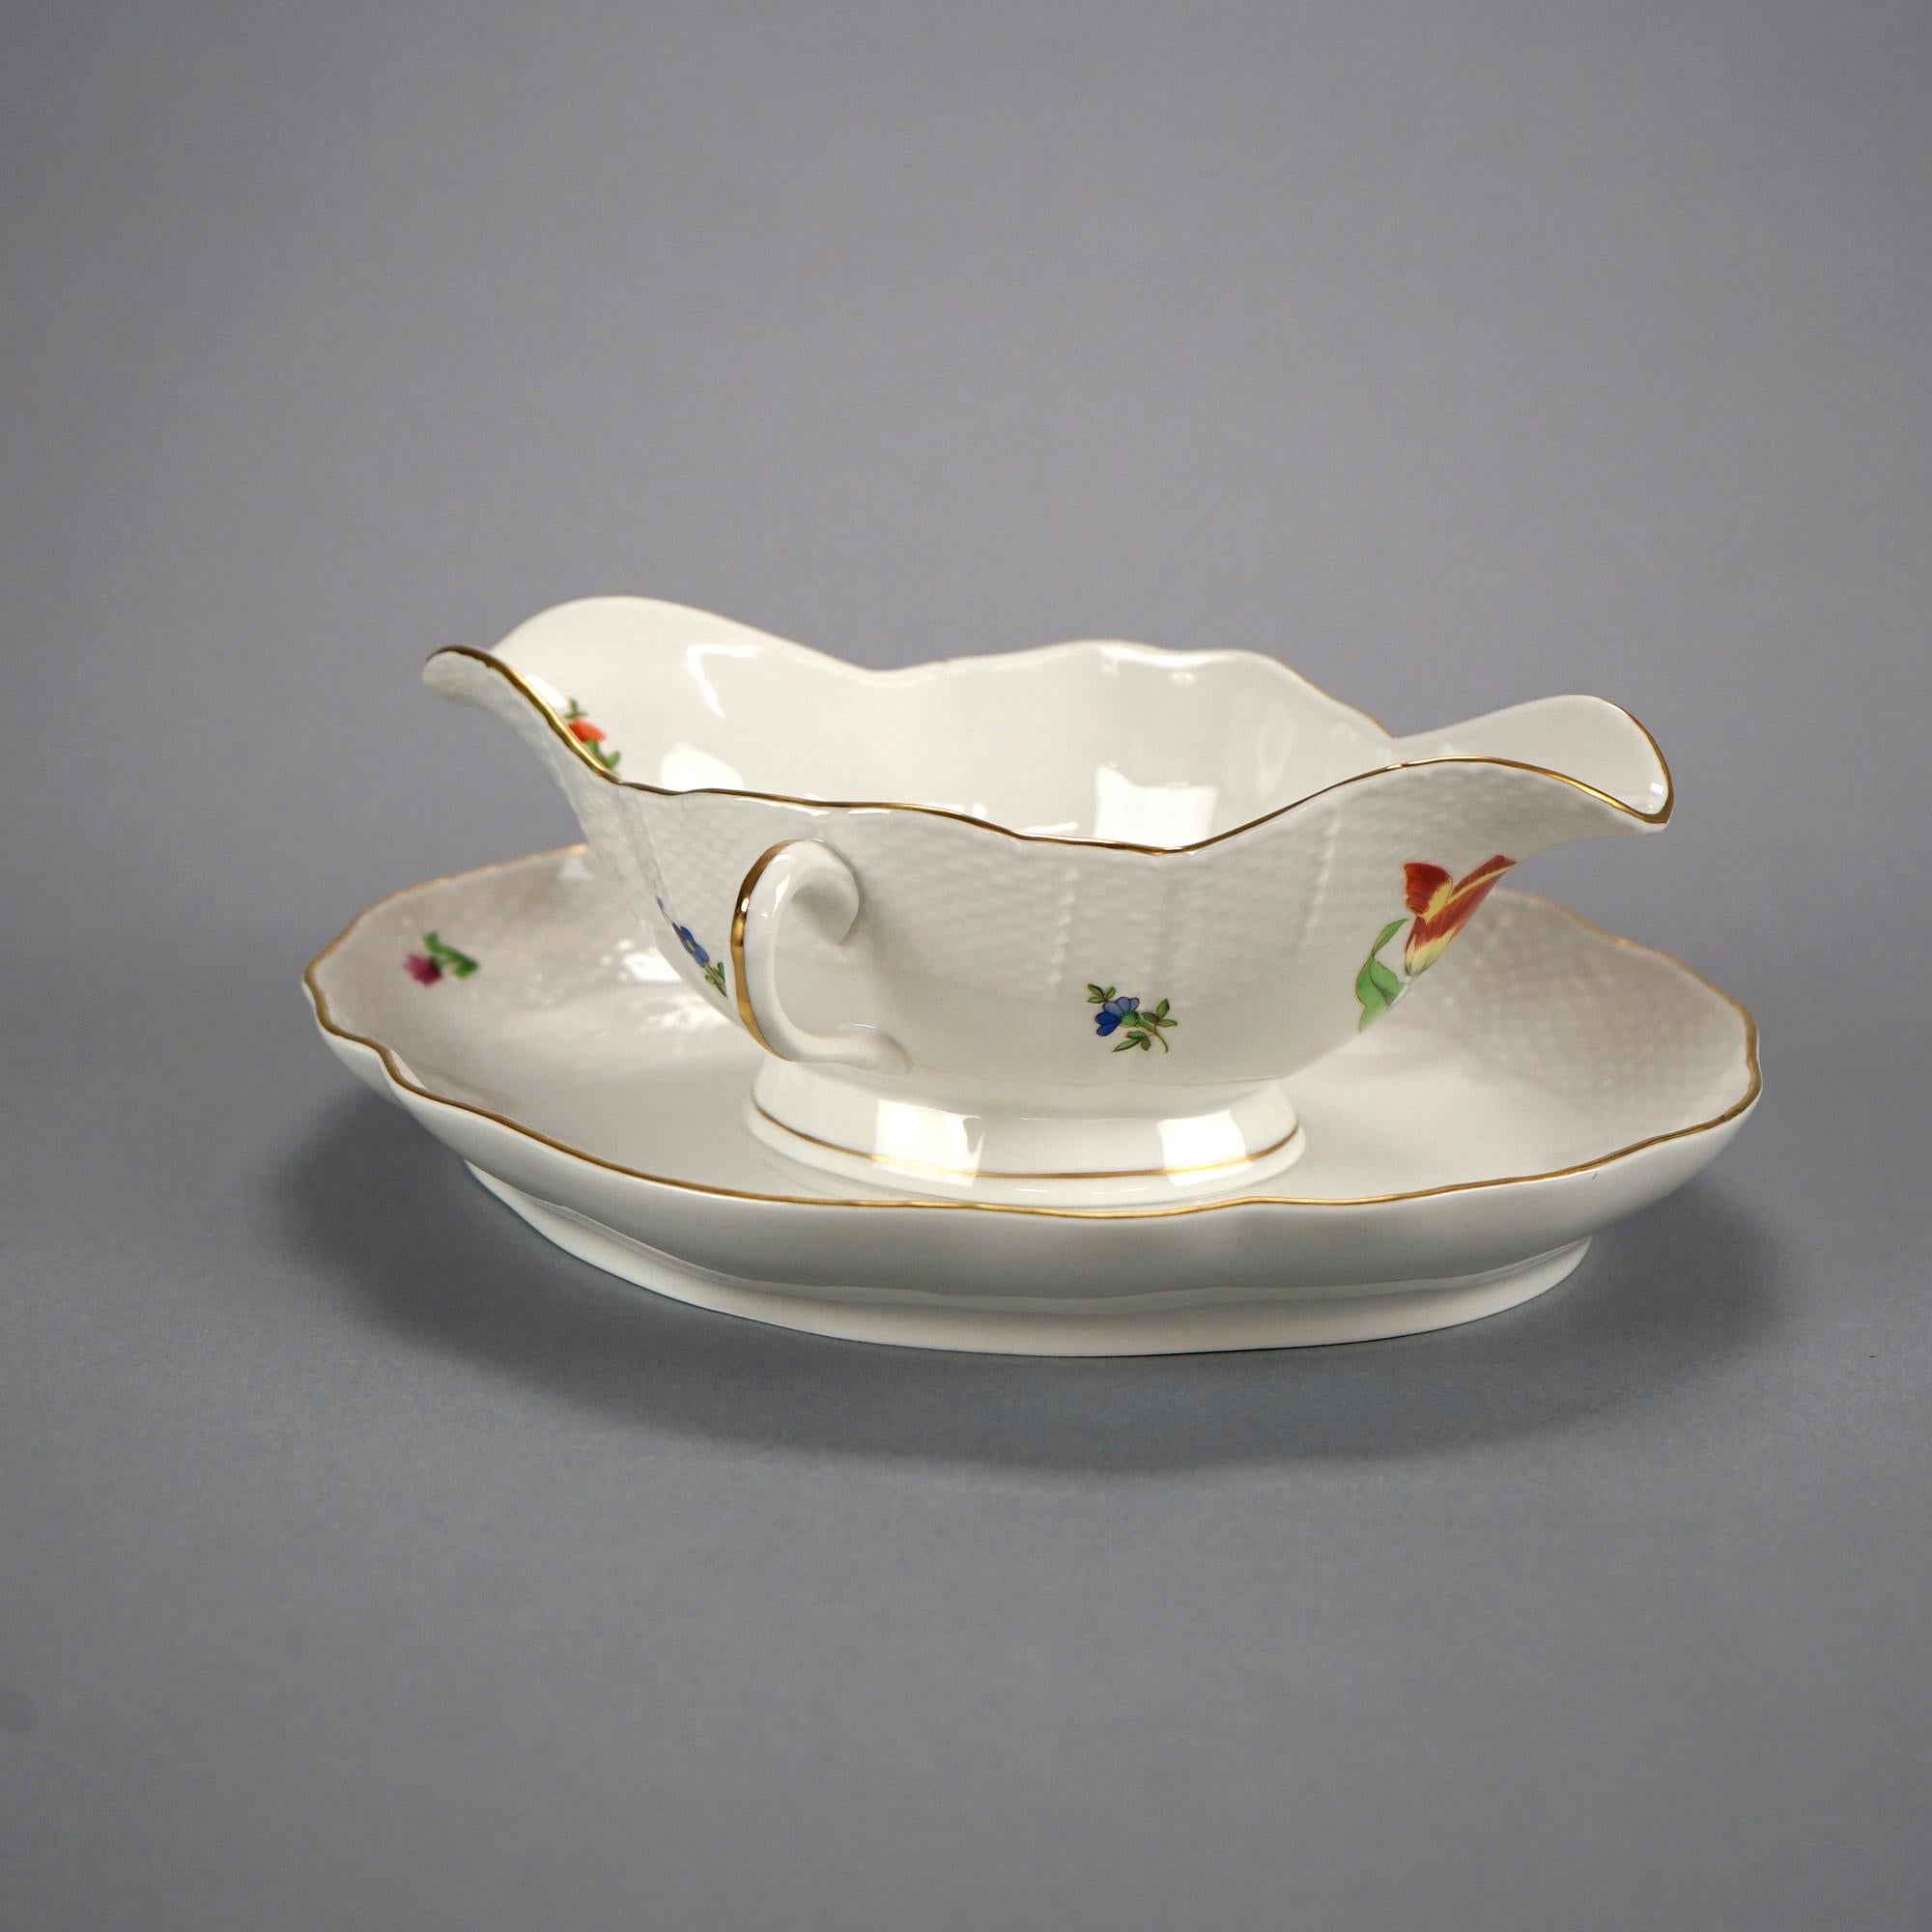 A gravy boat by Herend offers porcelain construction with painted flowers, gilt highlights, double handles and underplate, maker mark on base as photographed, 20th century

Measures- 3.75''H x 8.25''W x 10.25''D.

Catalogue Note: Ask about